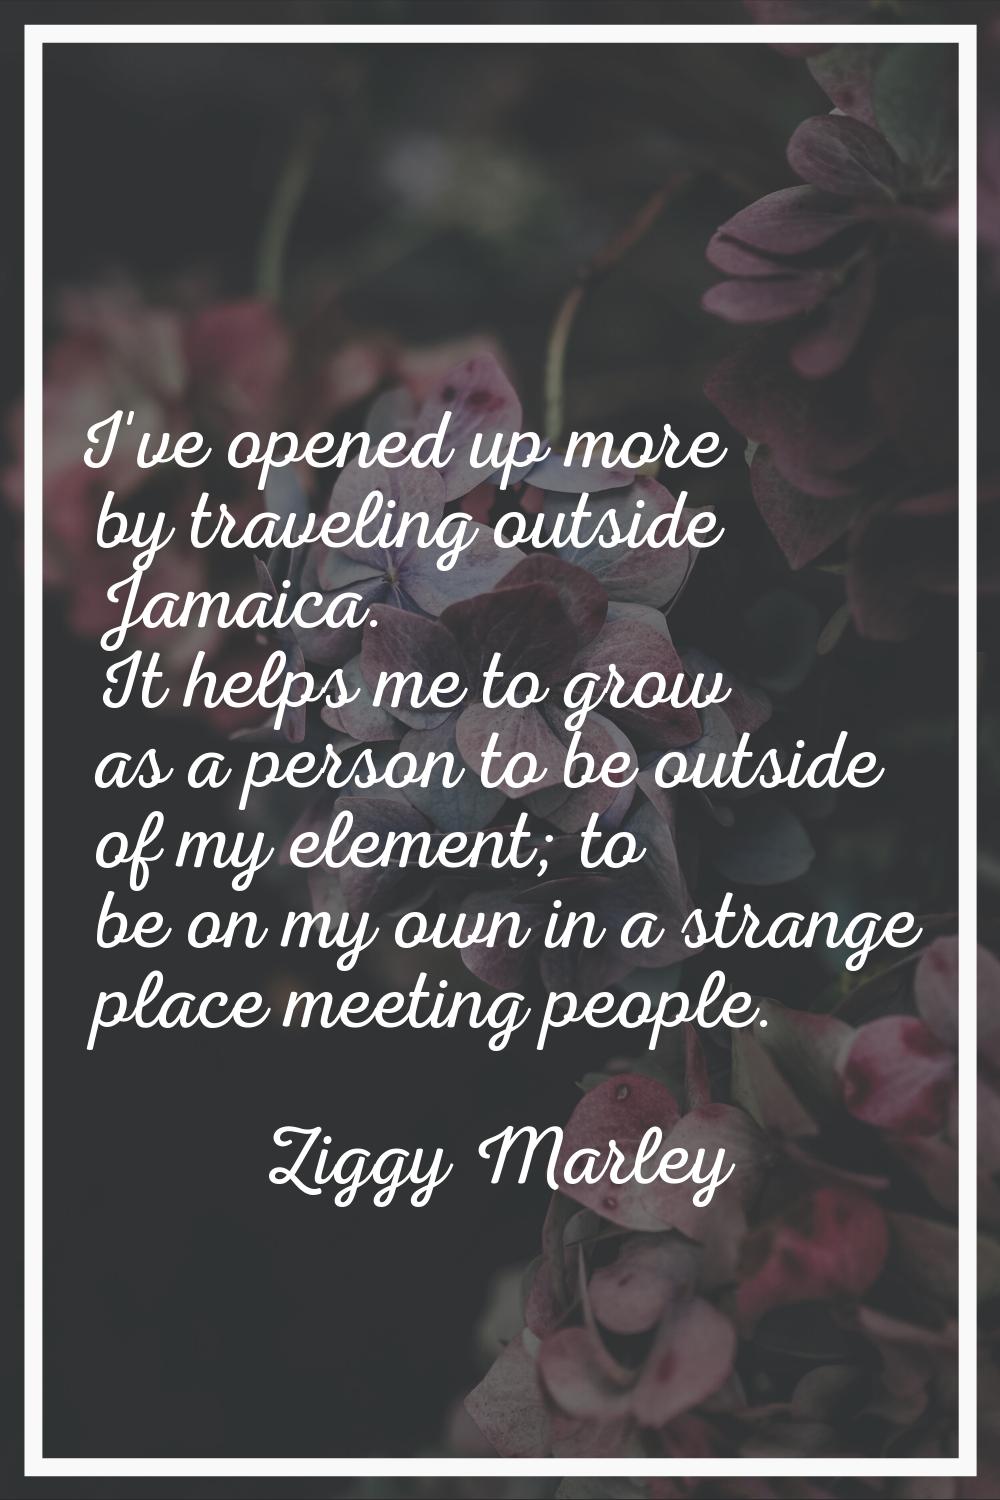 I've opened up more by traveling outside Jamaica. It helps me to grow as a person to be outside of 